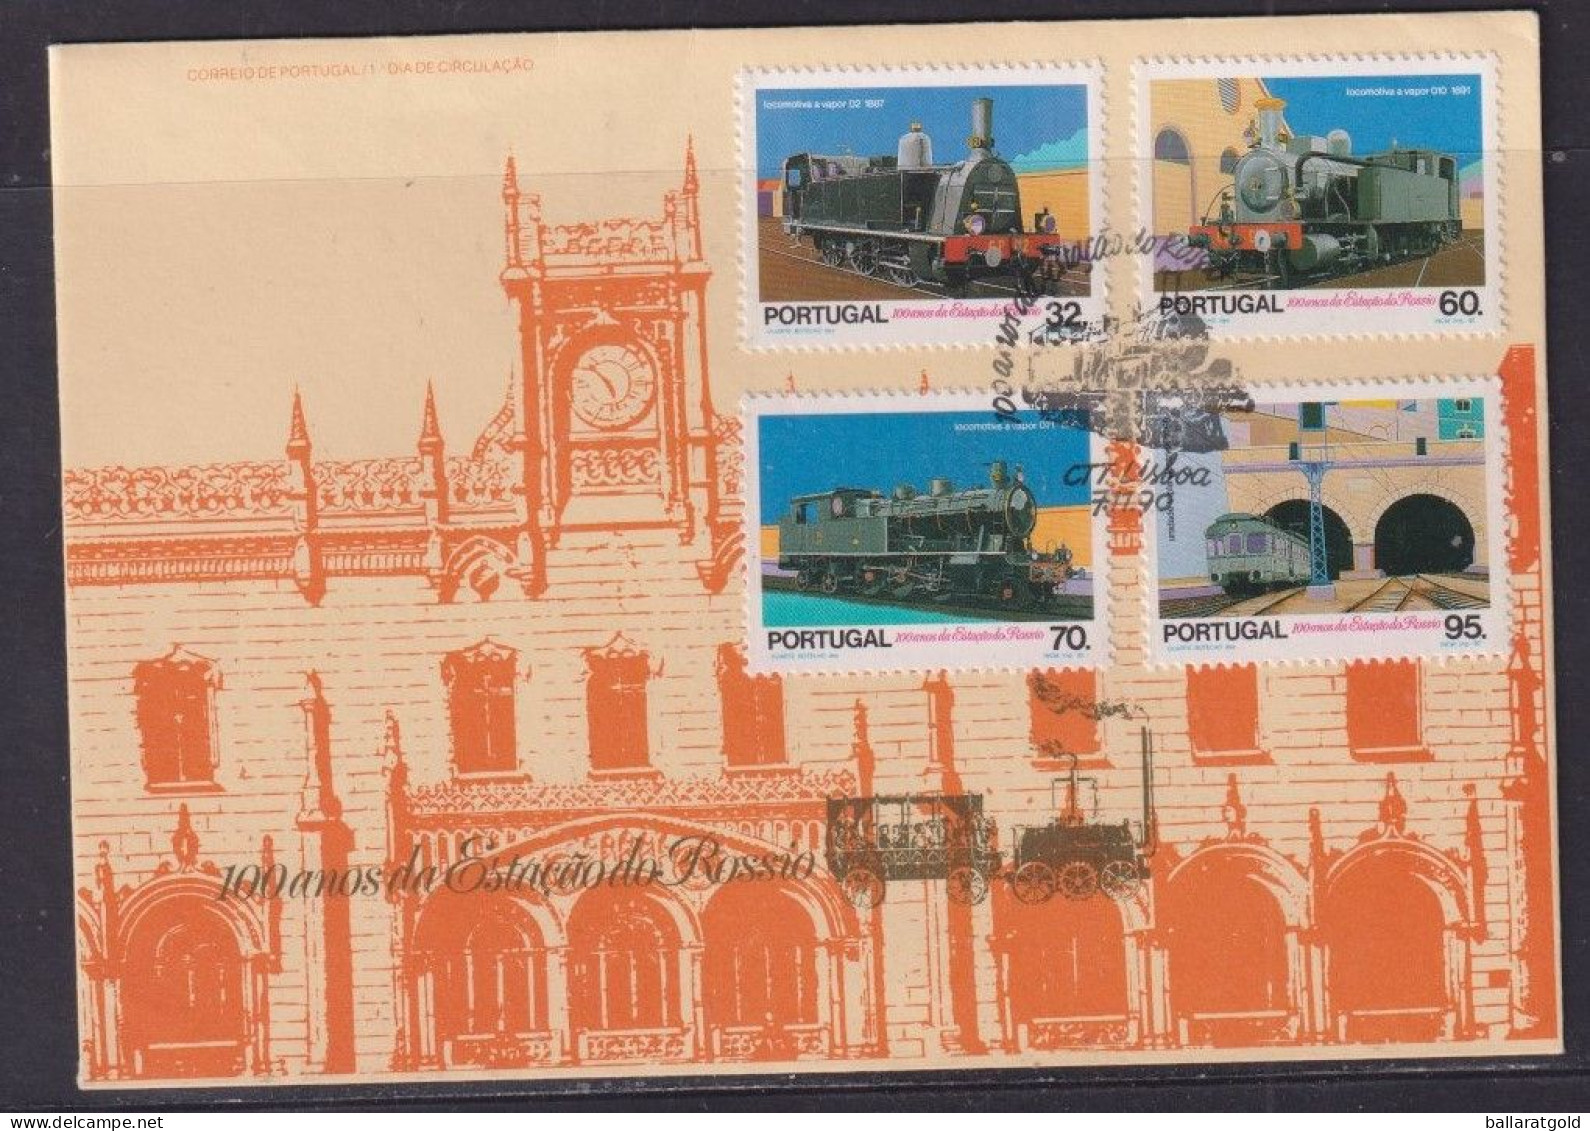 Portugal 1990 Locomotives First Day Cover - Unaddressed - Covers & Documents